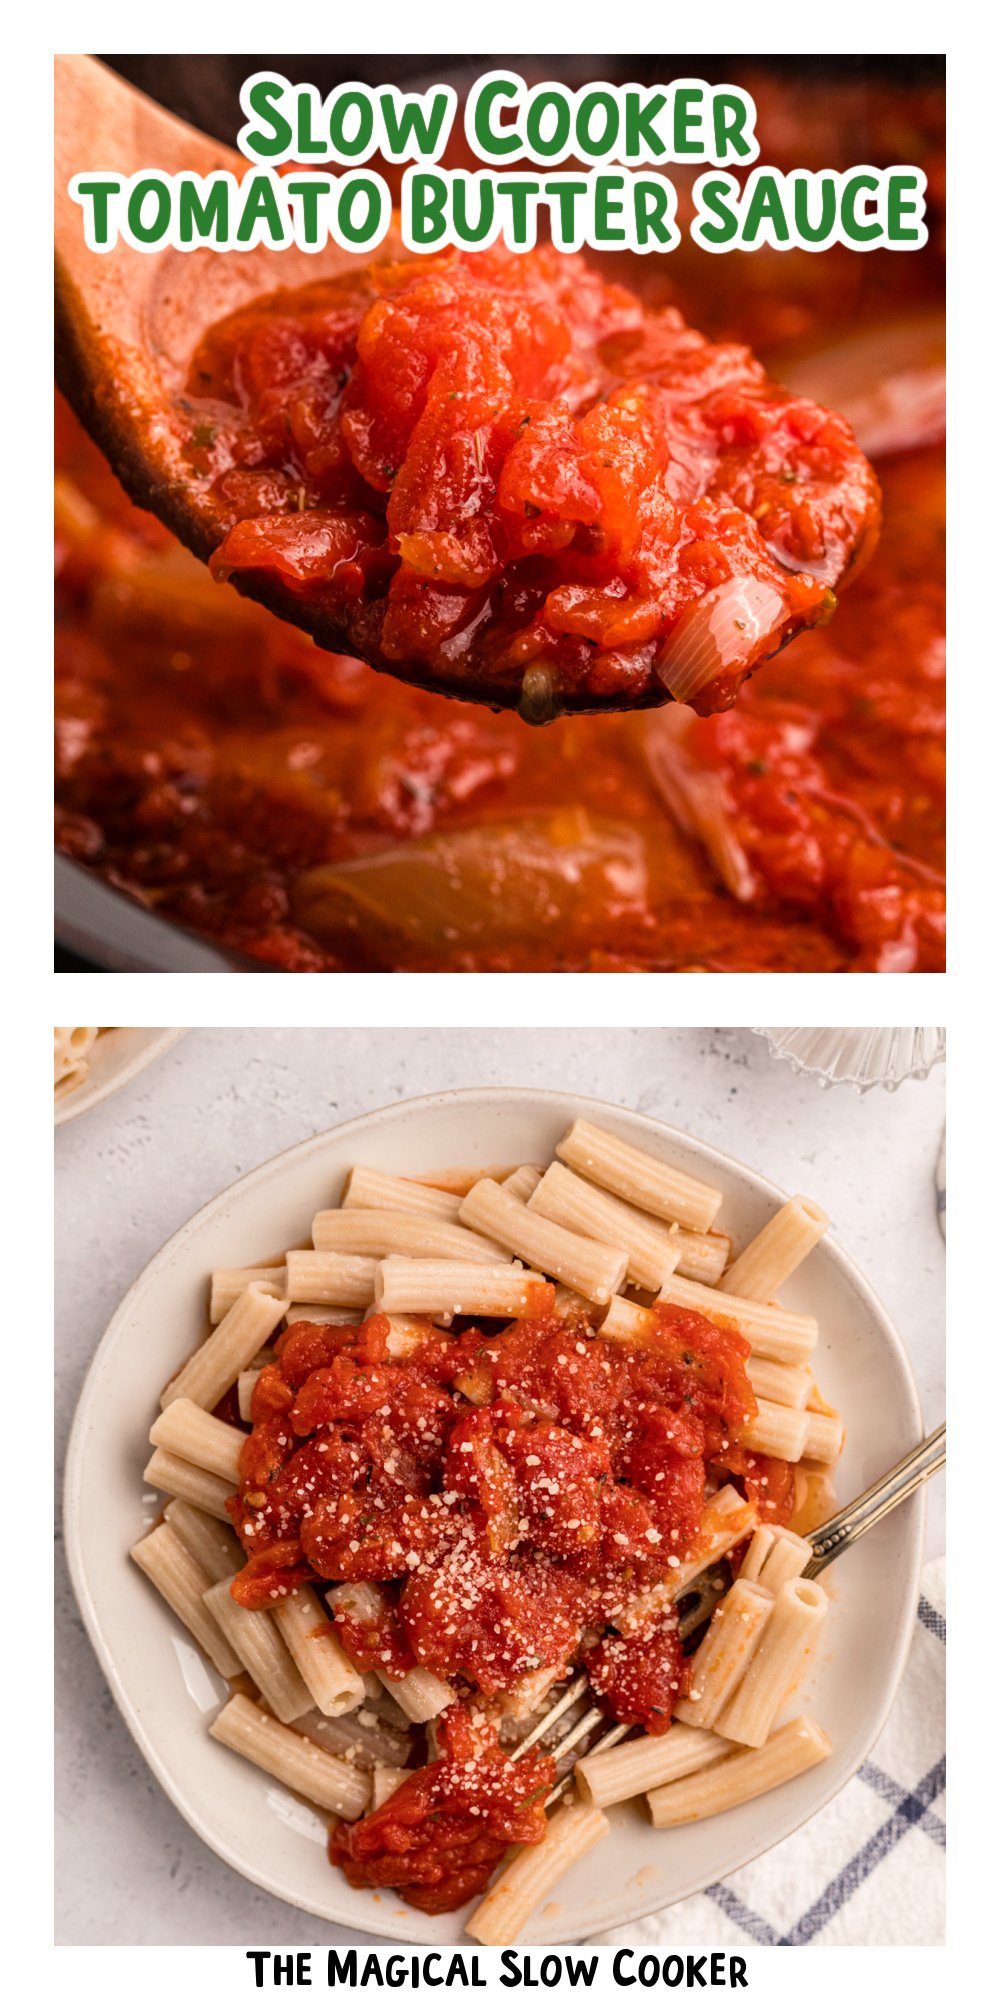 two images of slow cooker tomato butter sauce with text overlay.